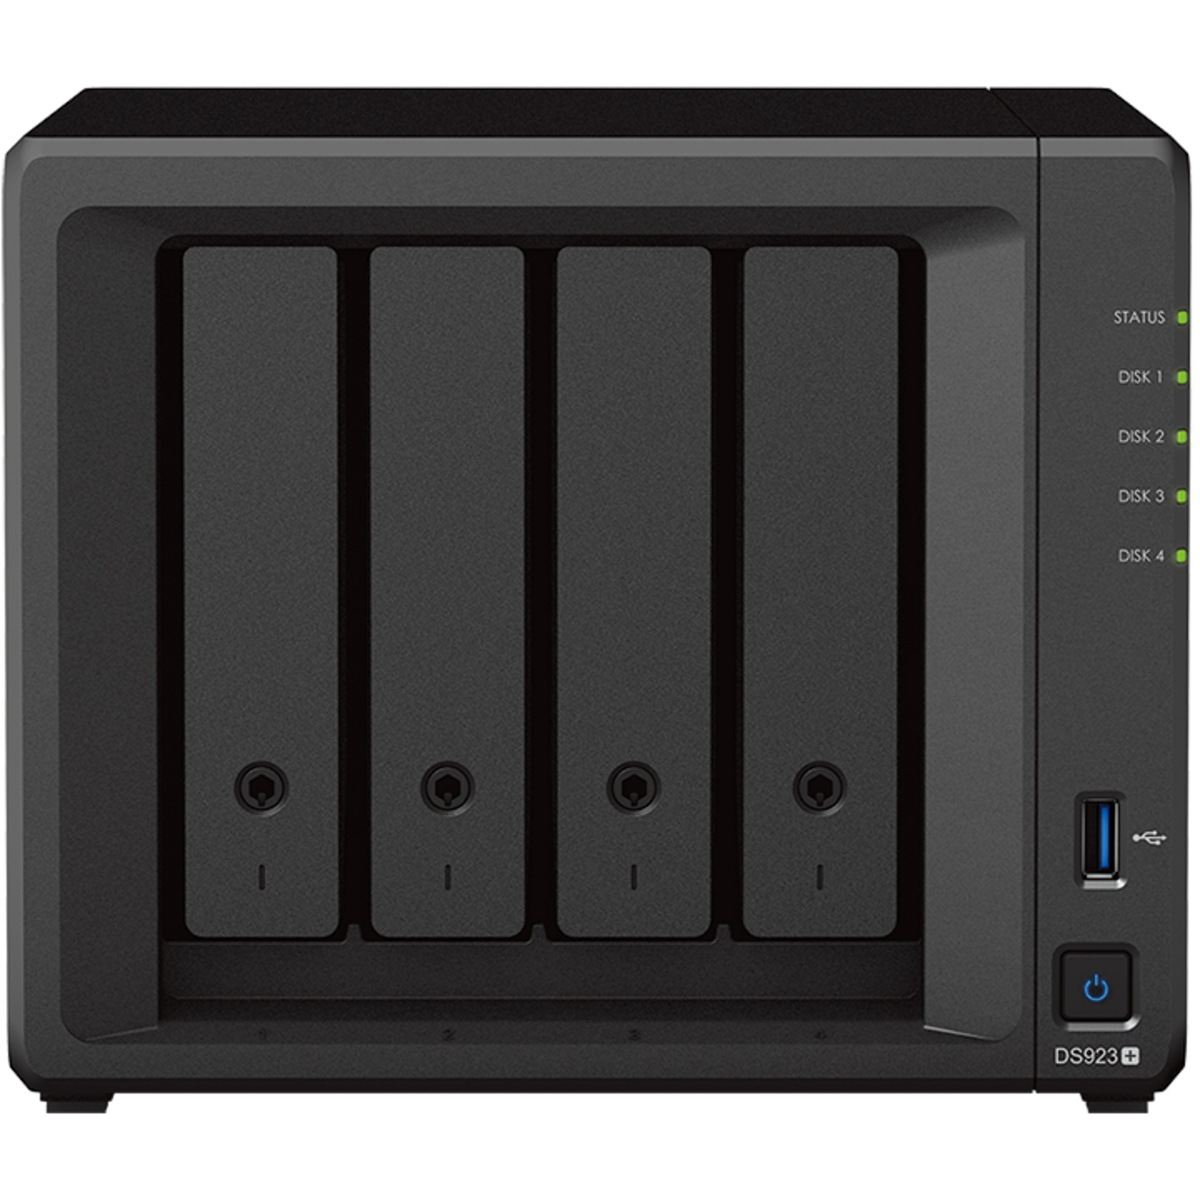 Synology DiskStation DS923+ 40tb 4-Bay Desktop Multimedia / Power User / Business NAS - Network Attached Storage Device 4x10tb Seagate IronWolf Pro ST10000NT001 3.5 7200rpm SATA 6Gb/s HDD NAS Class Drives Installed - Burn-In Tested - ON SALE - FREE RAM UPGRADE DiskStation DS923+